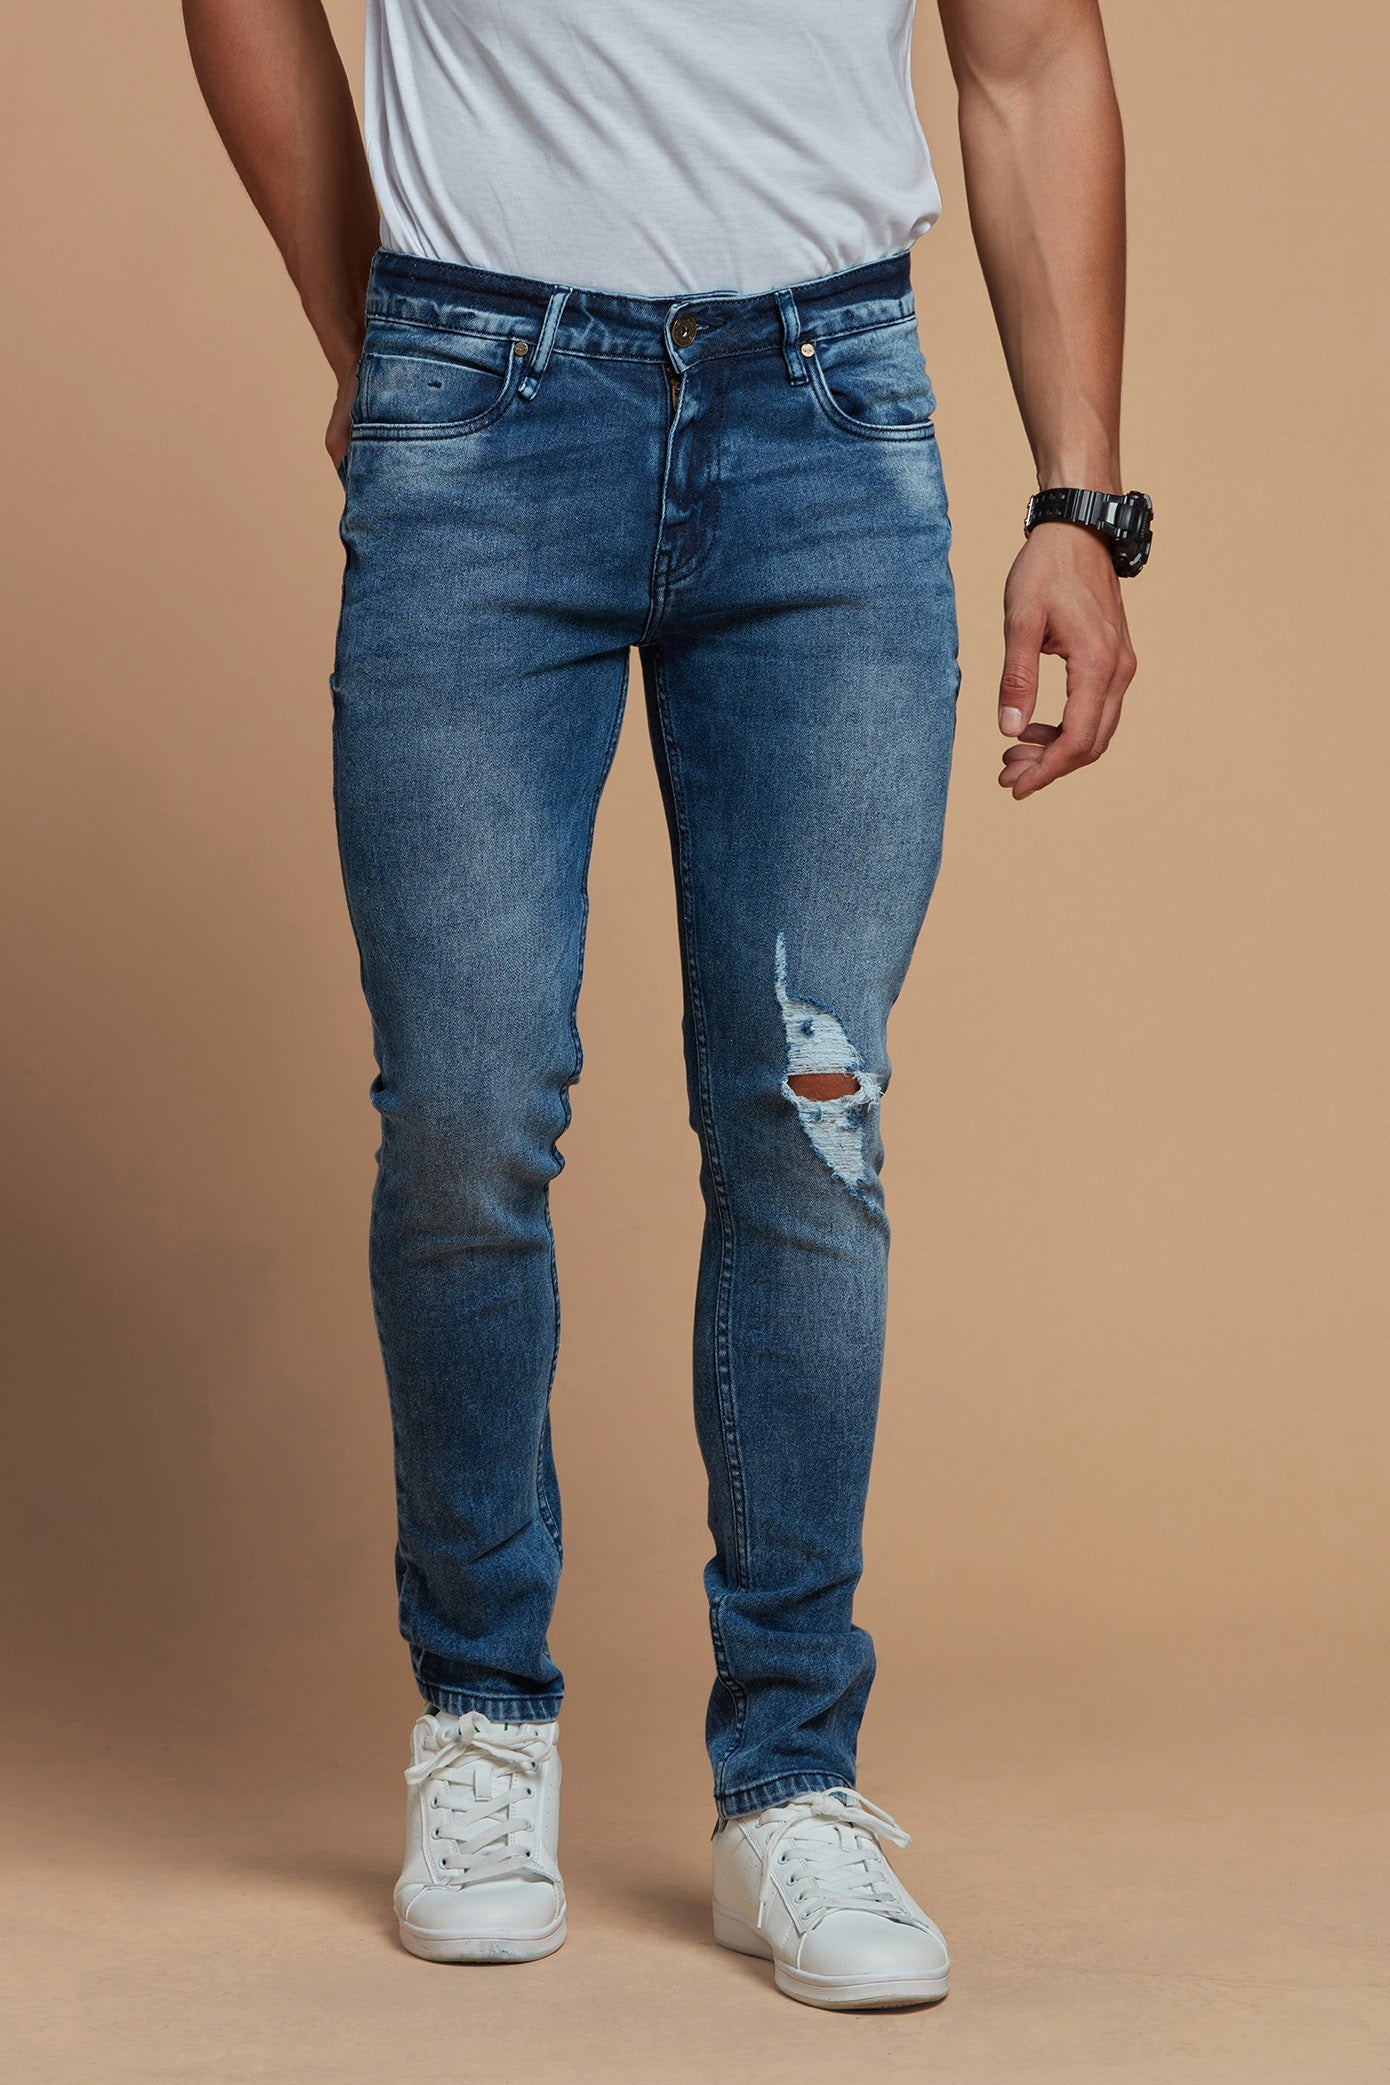 Baggy Hole Flare Denim Jeans Trousers For Men For Men Hip Hop Distressed  Streetwear With Ripped Flared Biker Tailored And Washed Destroyed Design  From Dhtopclothes, $41 | DHgate.Com